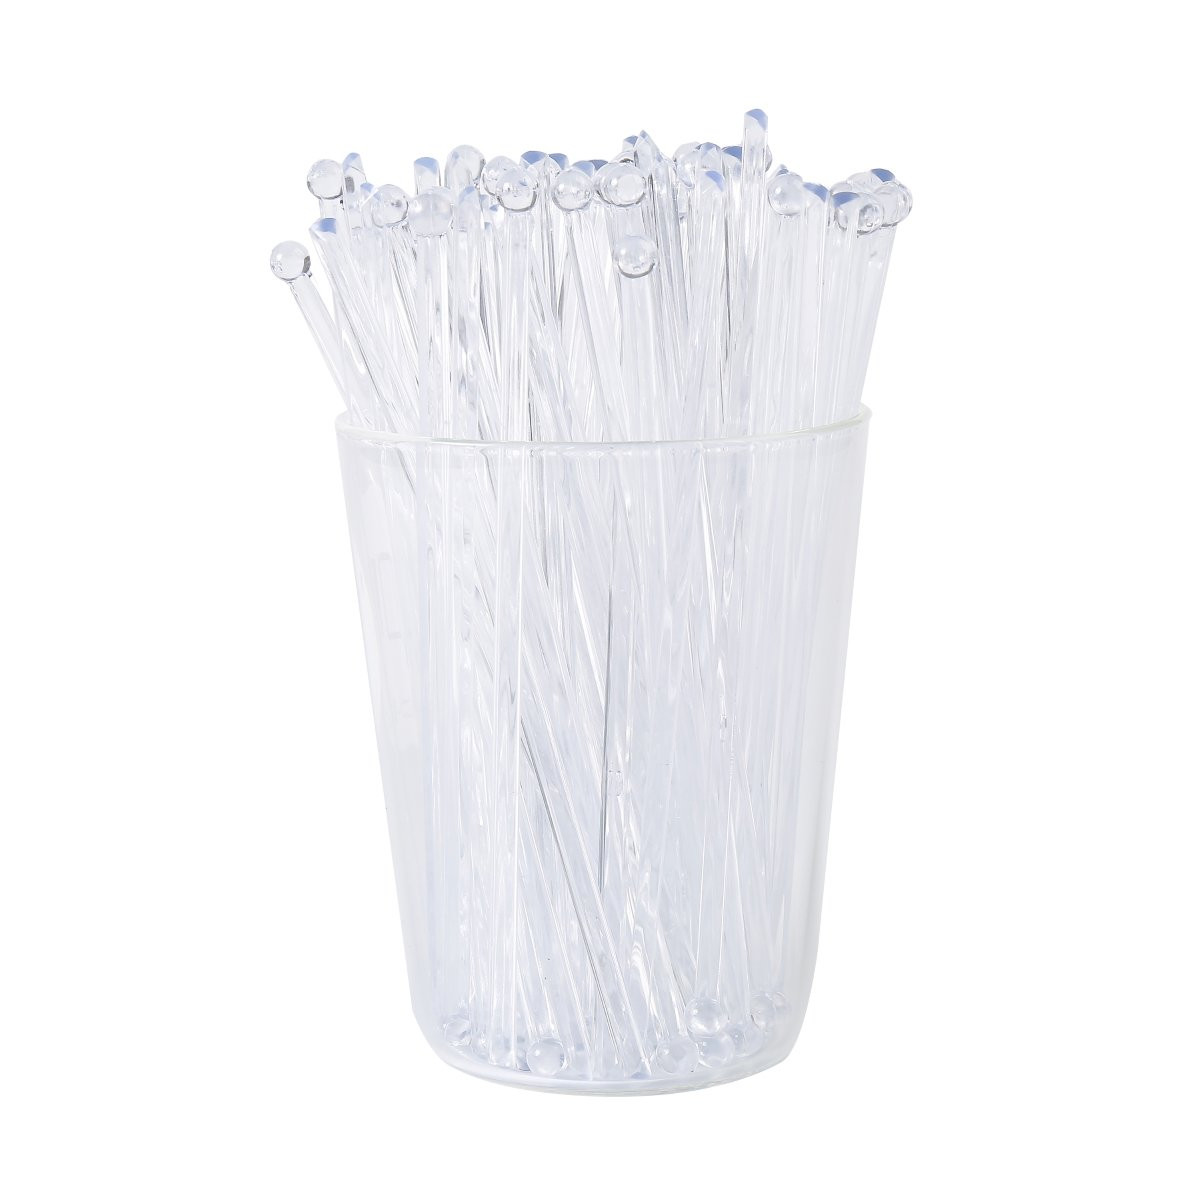 21 Lovely 6 Inch Round Glass Vase 2024 free download 6 inch round glass vase of cheap 8 inch plastic ball find 8 inch plastic ball deals on line at for get quotations ac2b7 gmark 6 inch plastic round top swizzle sticks 100 ct clear ball head s